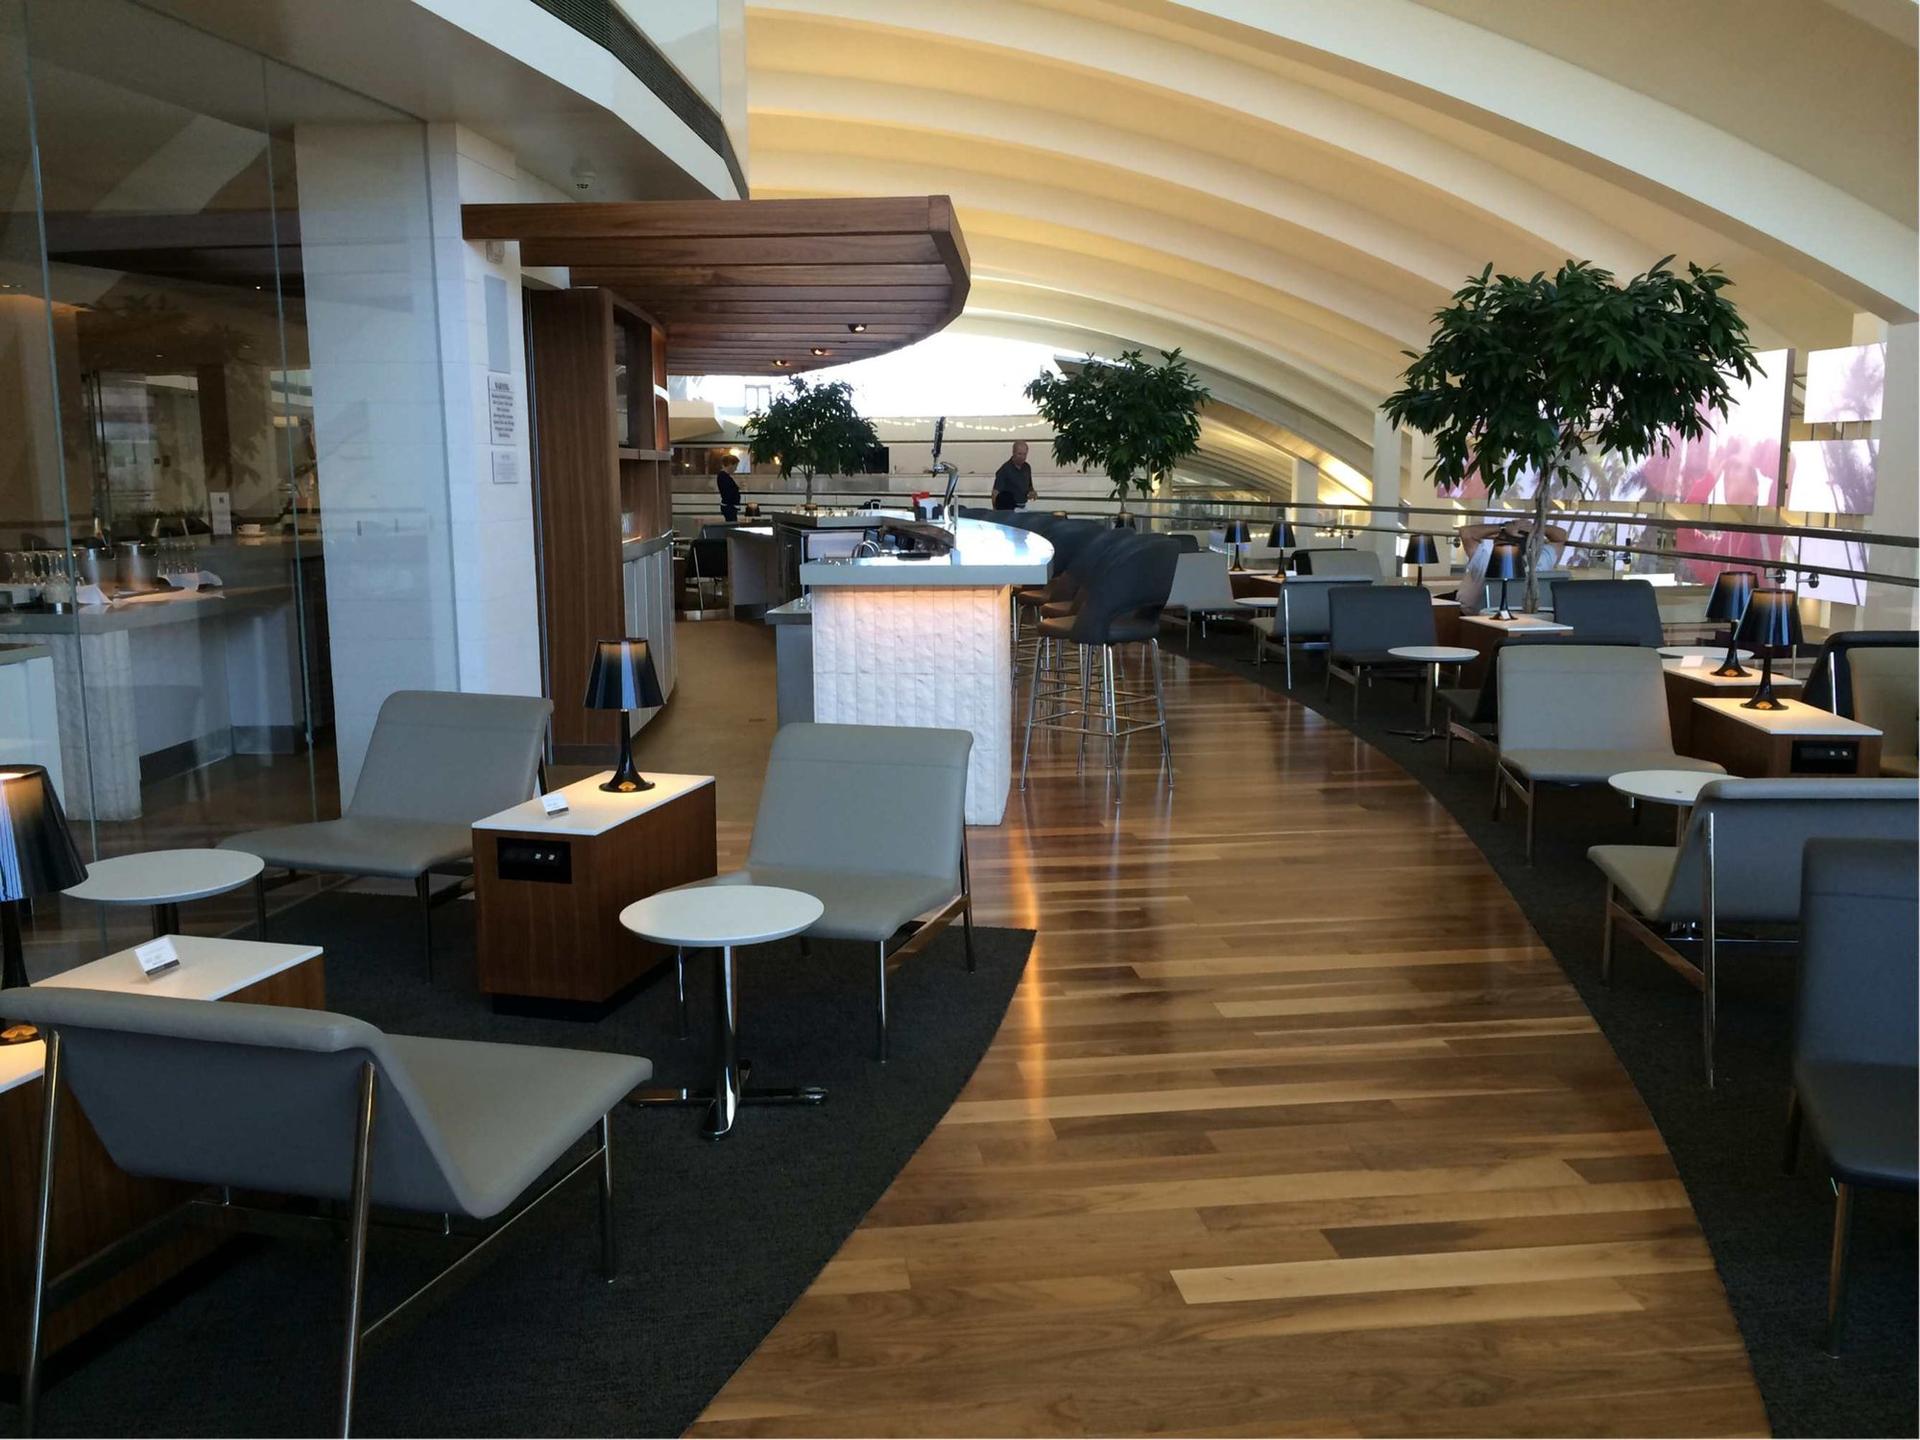 Star Alliance Business Class Lounge image 8 of 72